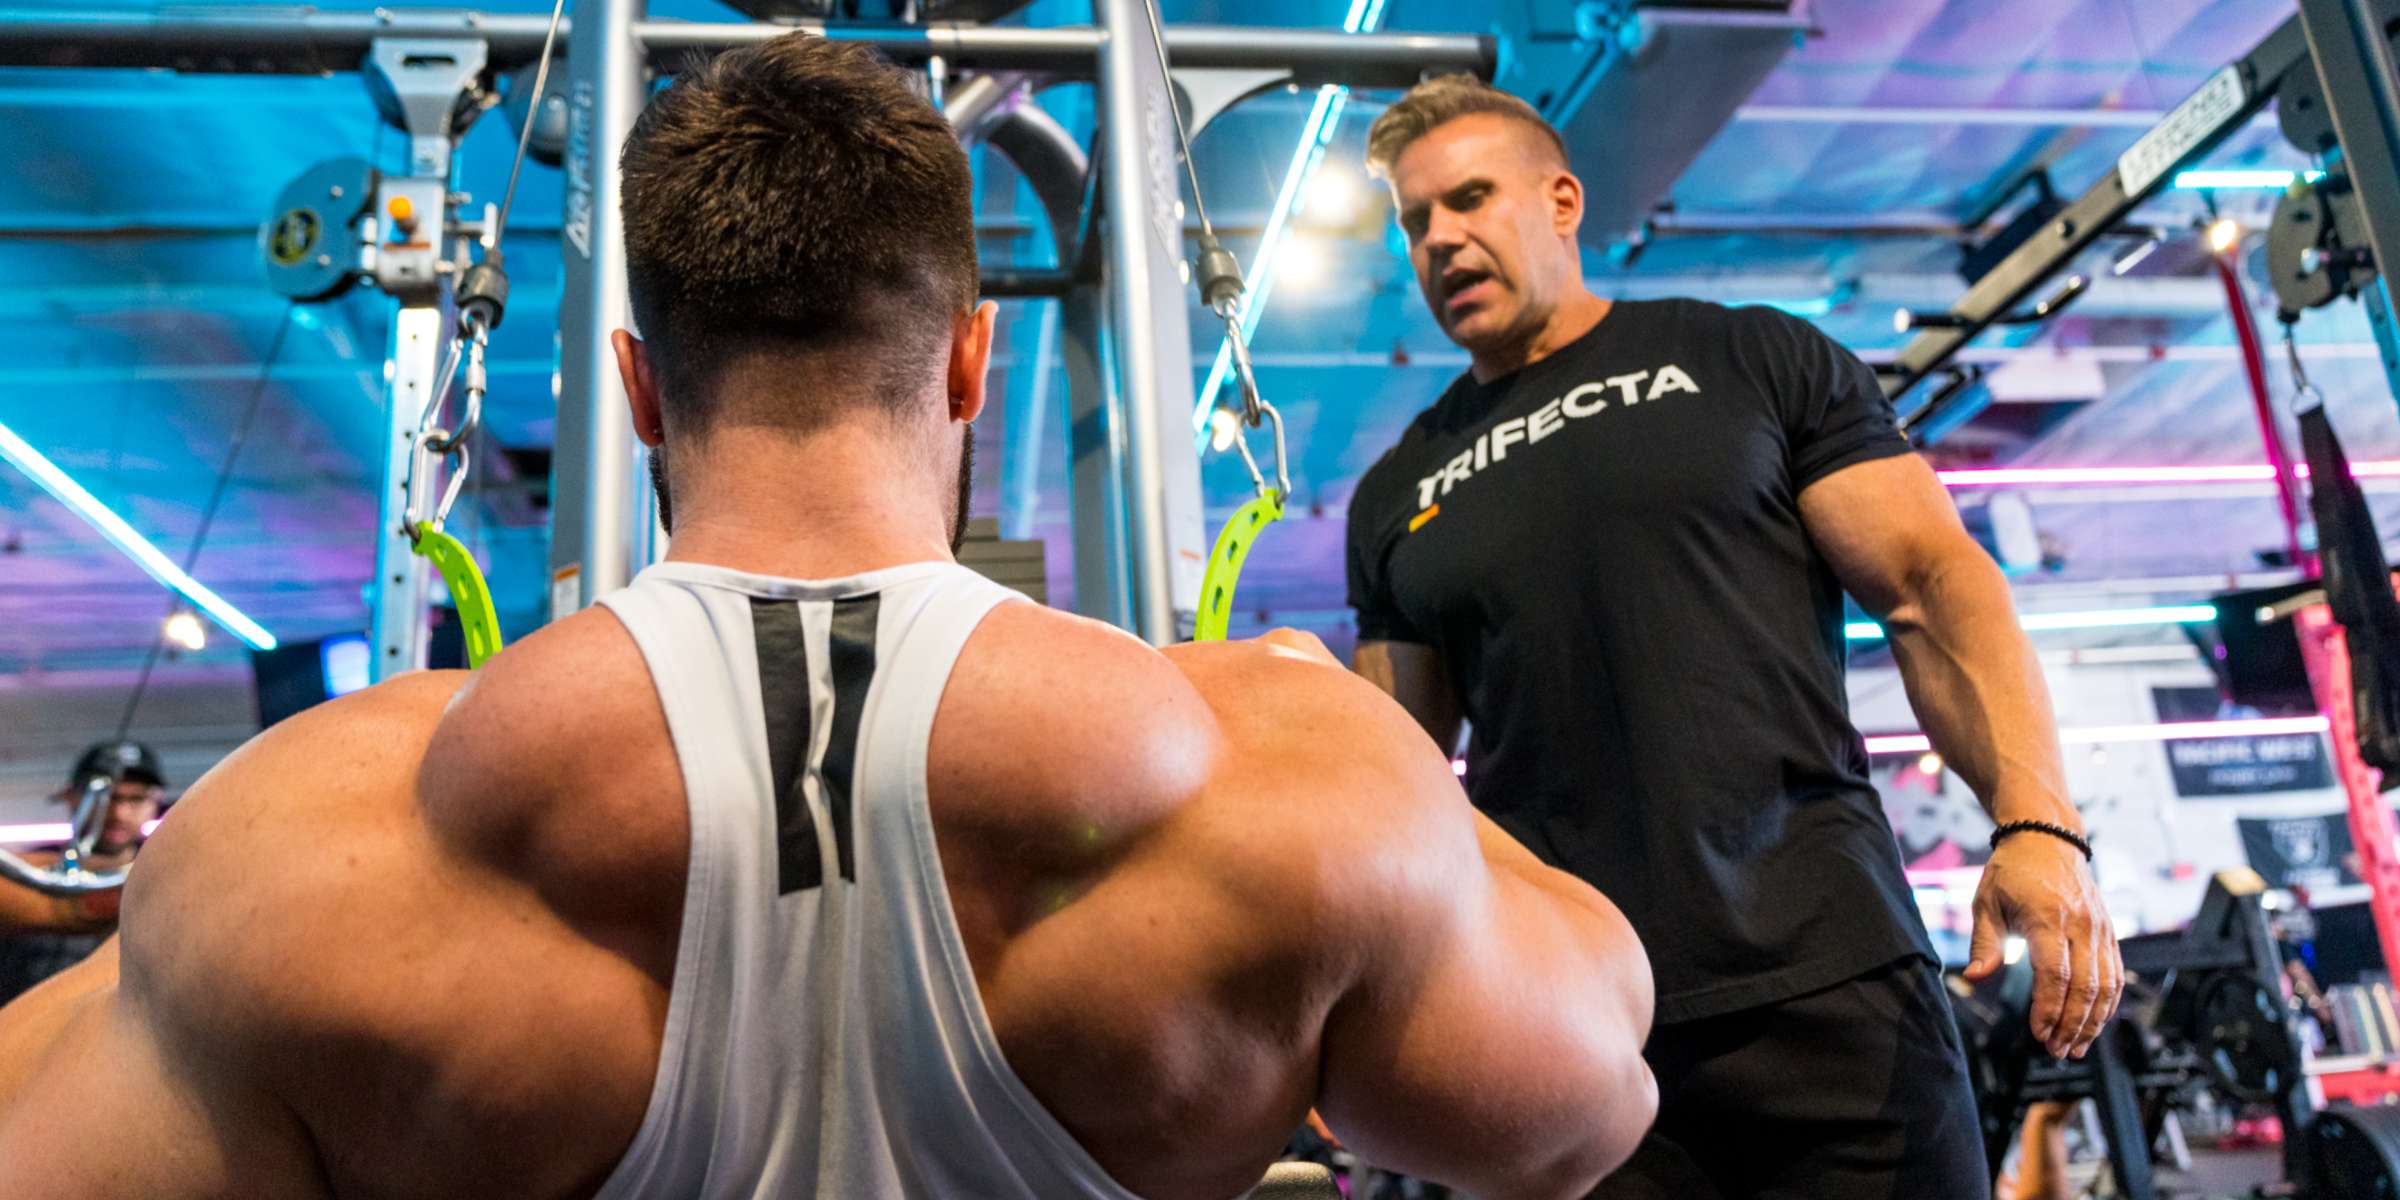 How Often Should You Lift To Build Muscle?